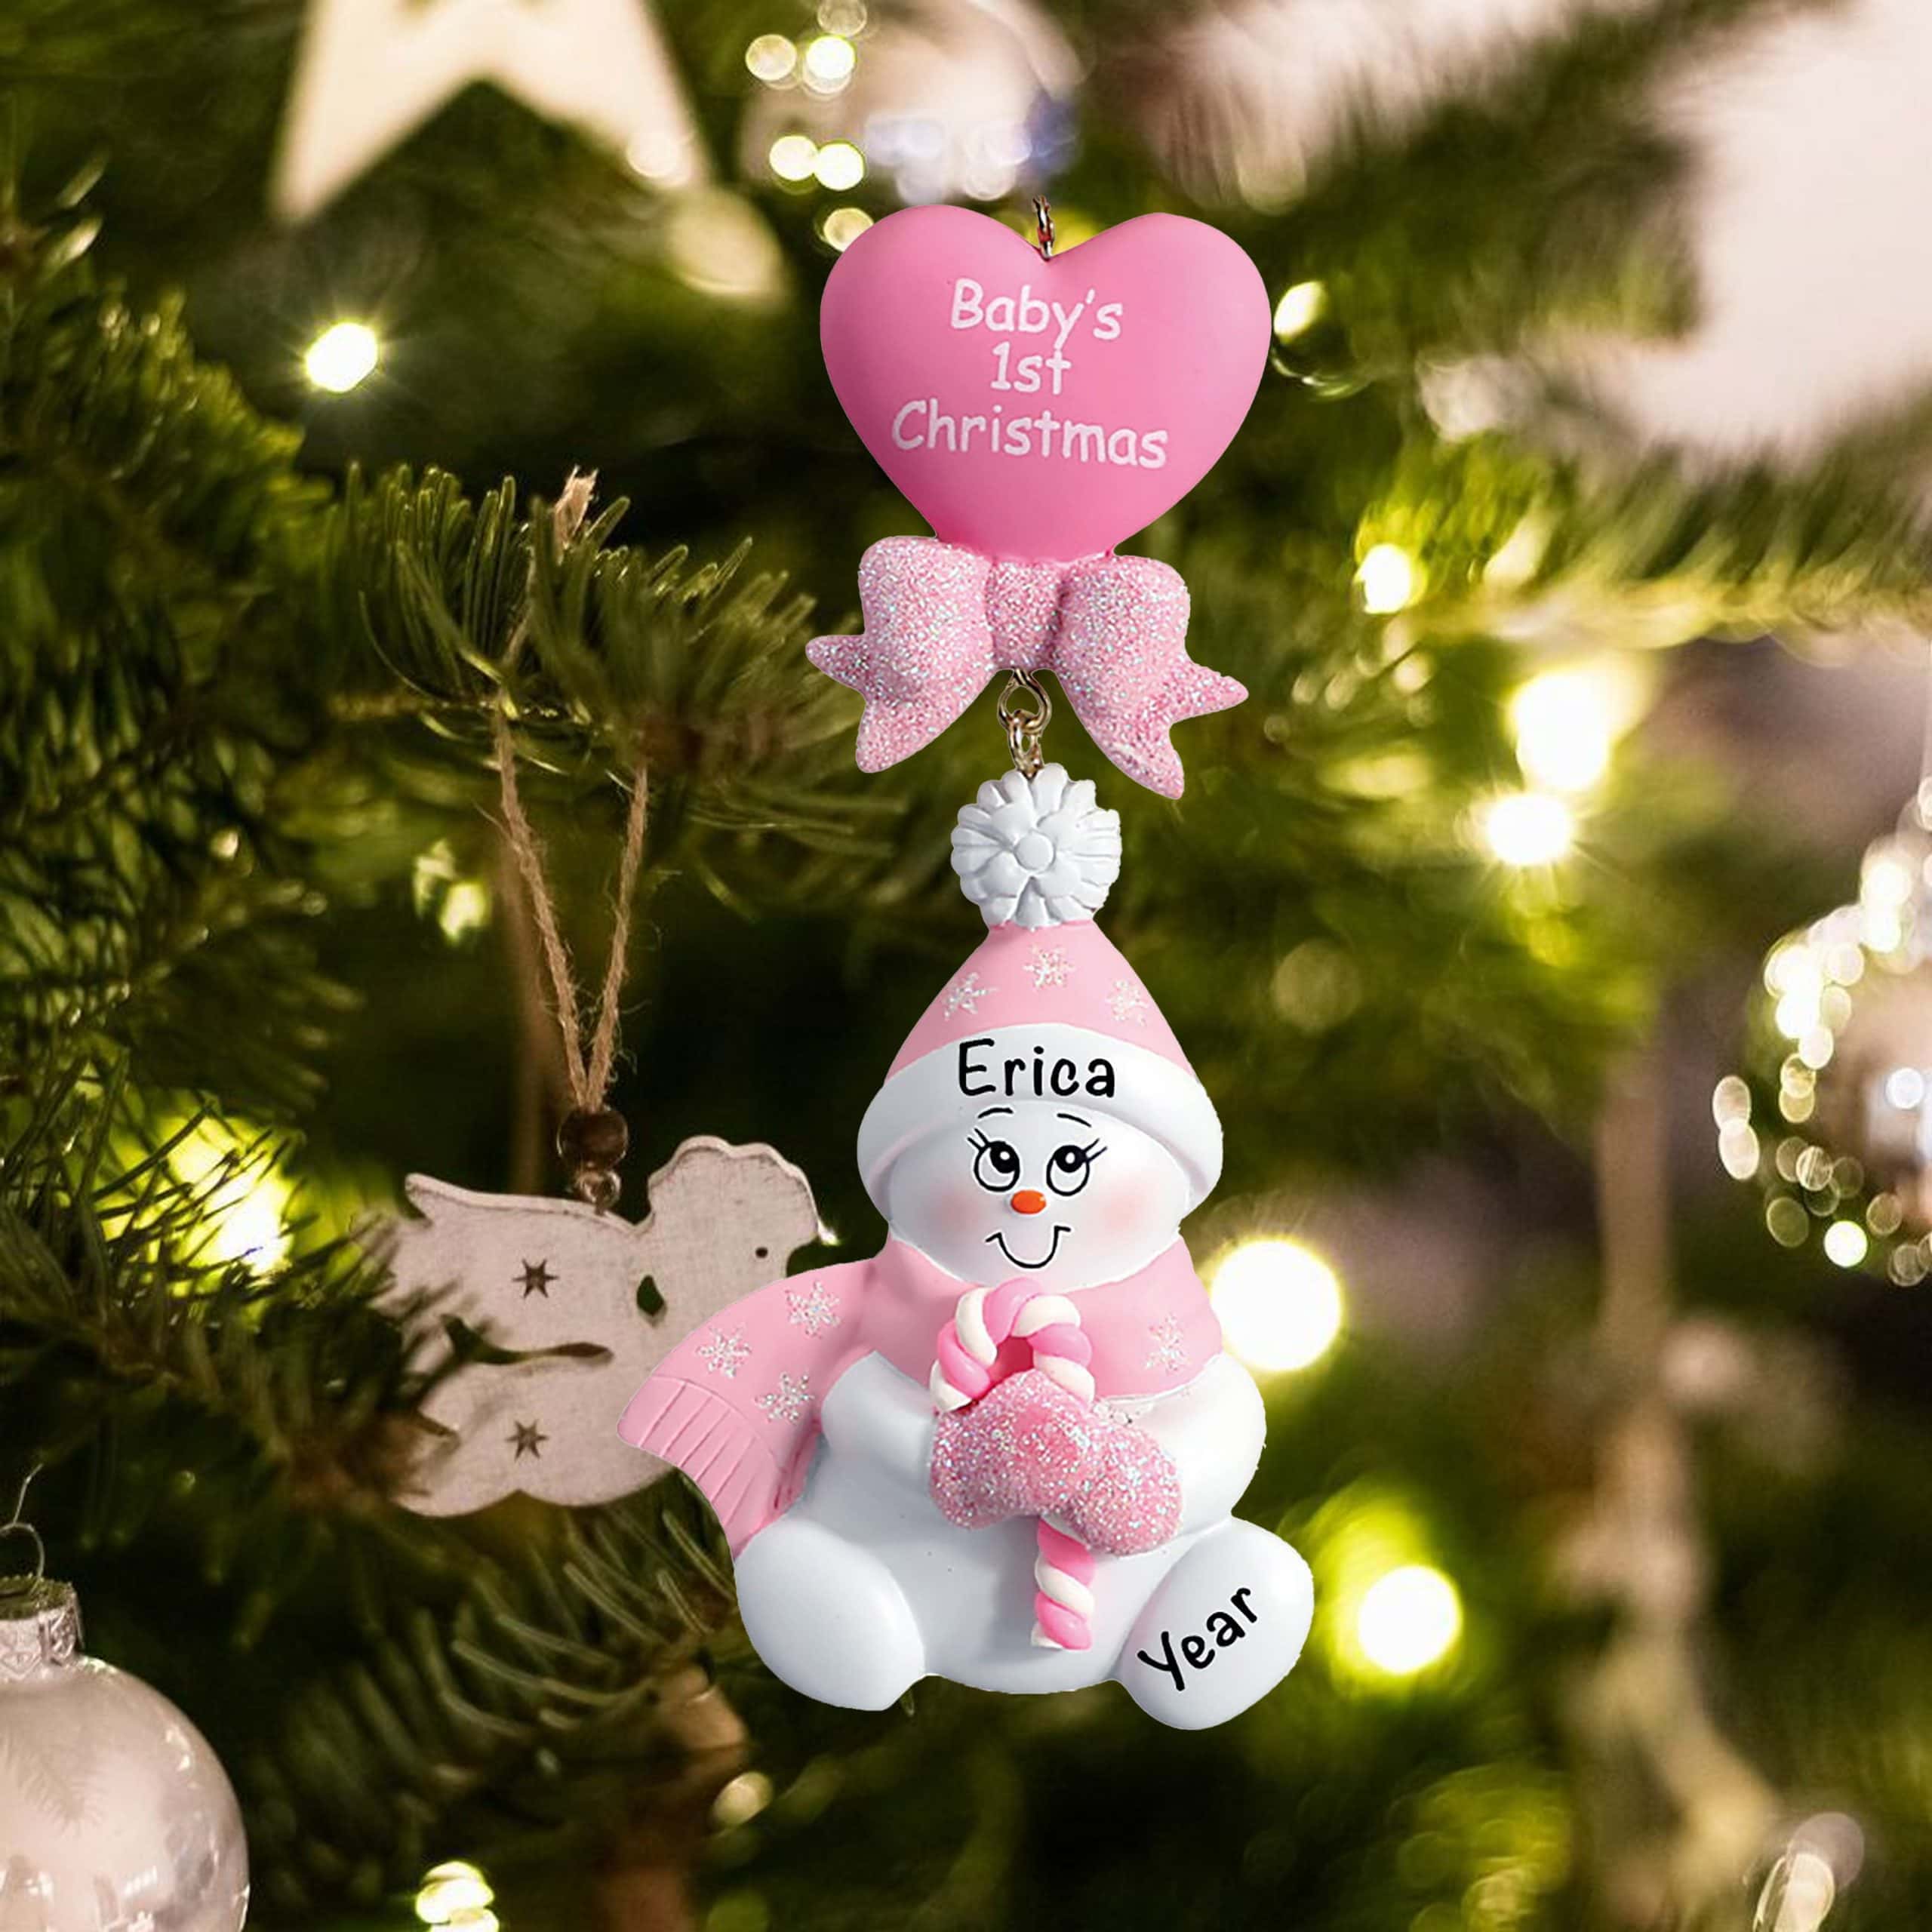 Boy w/ Candy Cane & Blue Heart Baby's First Christmas Personalized Ornament 